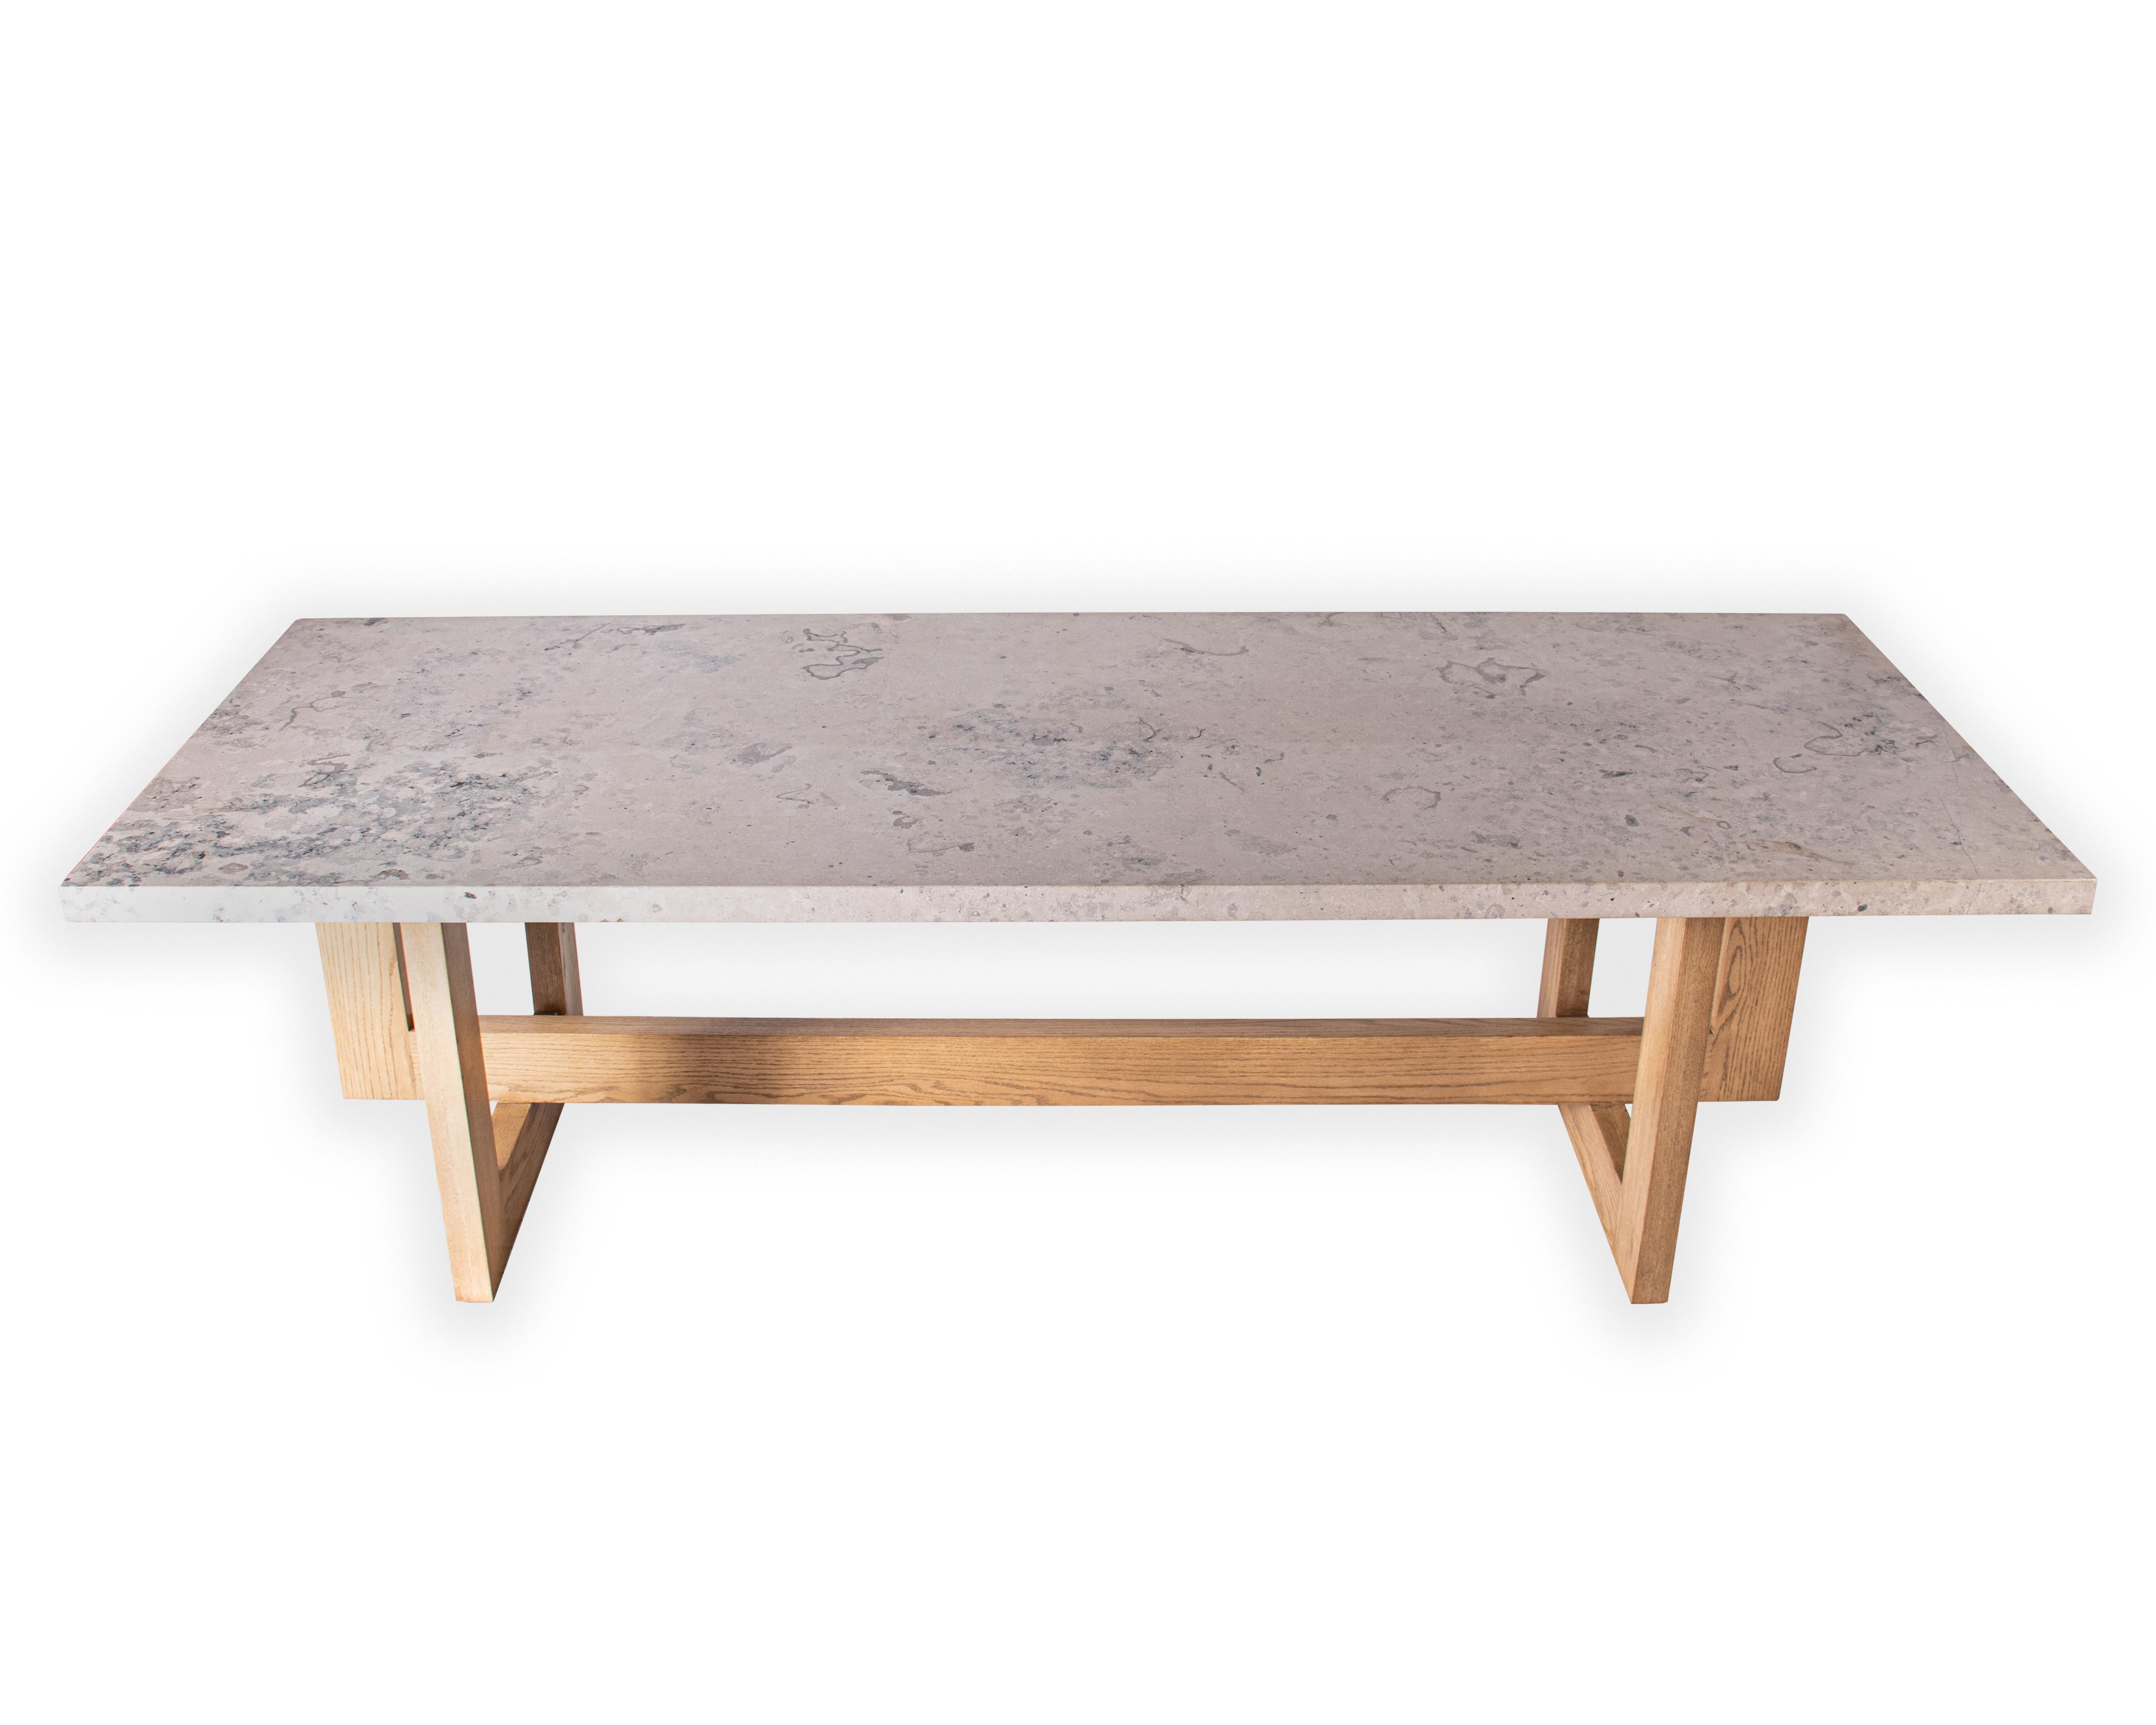 Vision and design custom jura grey marble dining table with an oak geometric base and Cairo finish.

 Designed by Brendan Bass for the Vision and Design Collection, by using high quality materials and textures. All materials are sourced from local